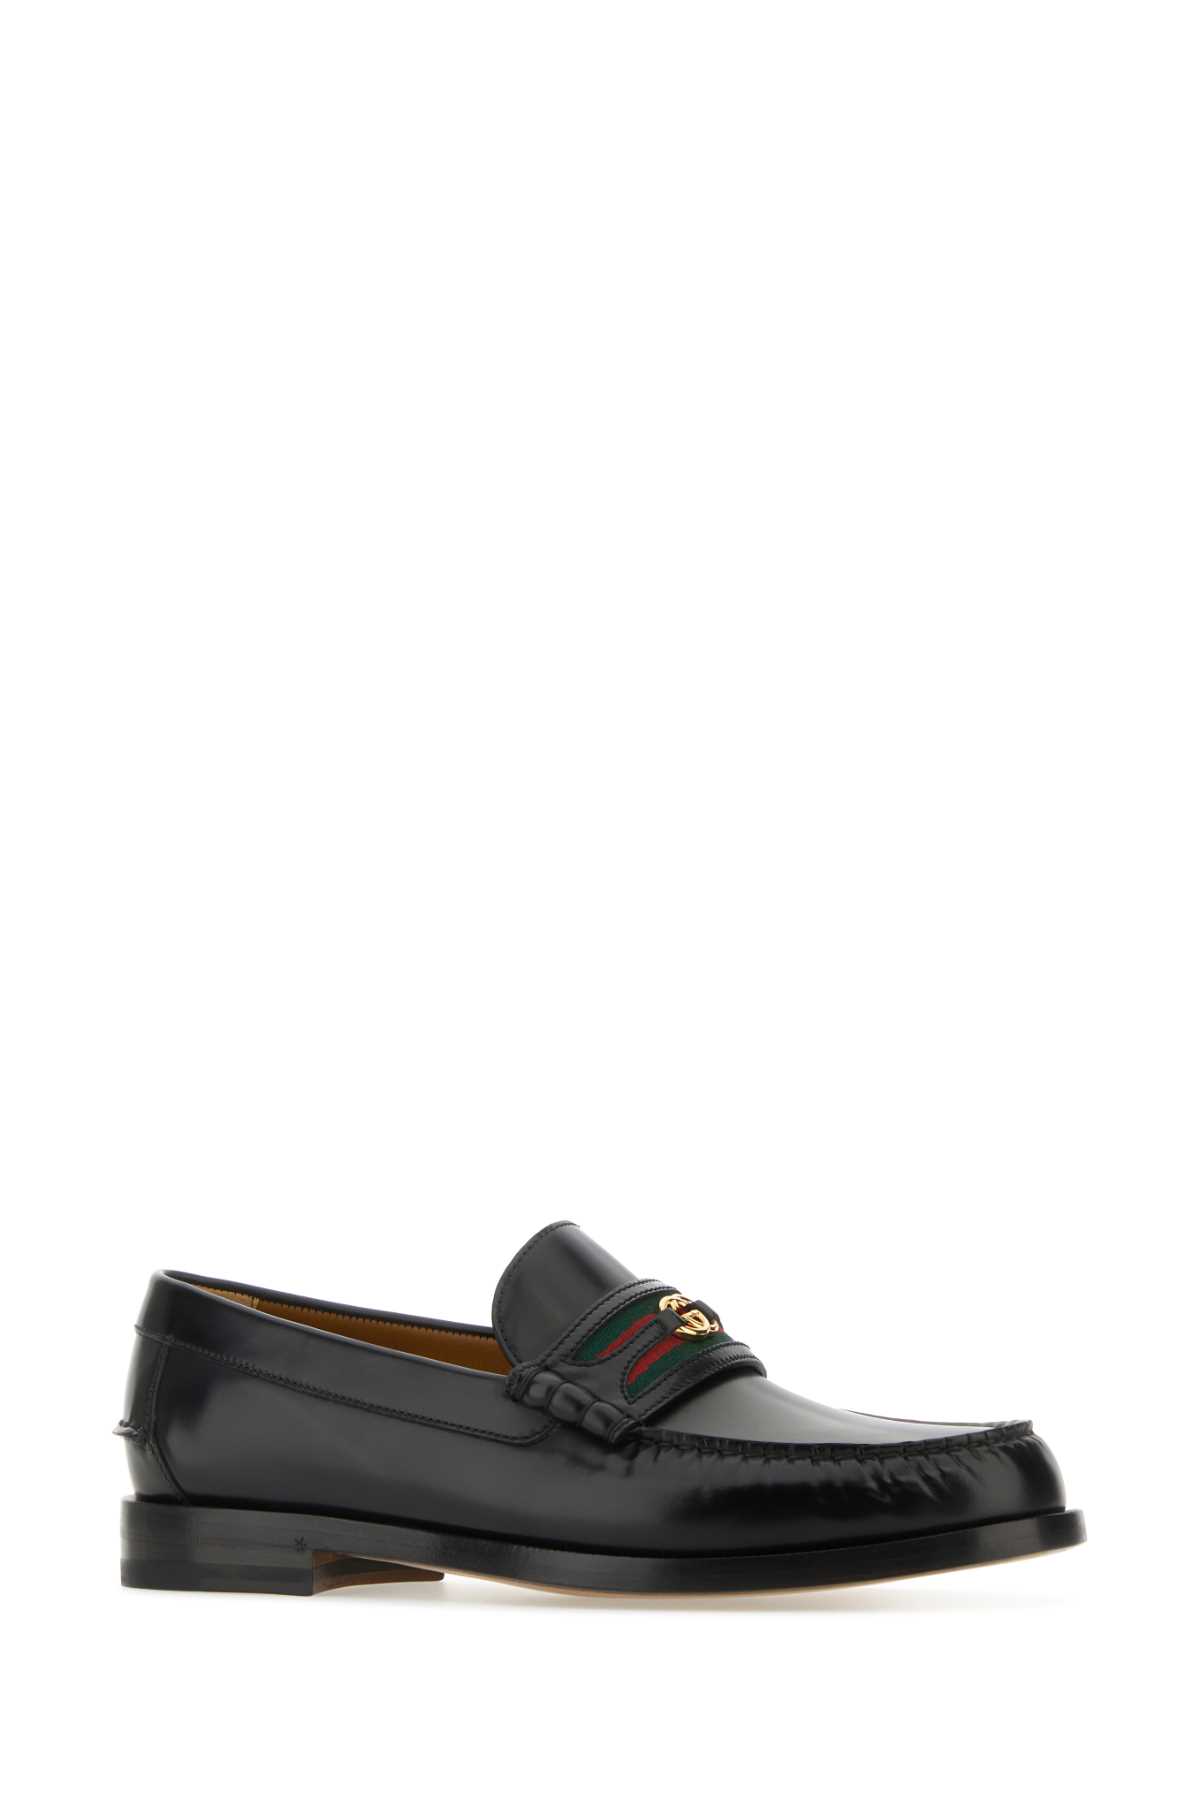 Shop Gucci Black Leather 1953 Loafers